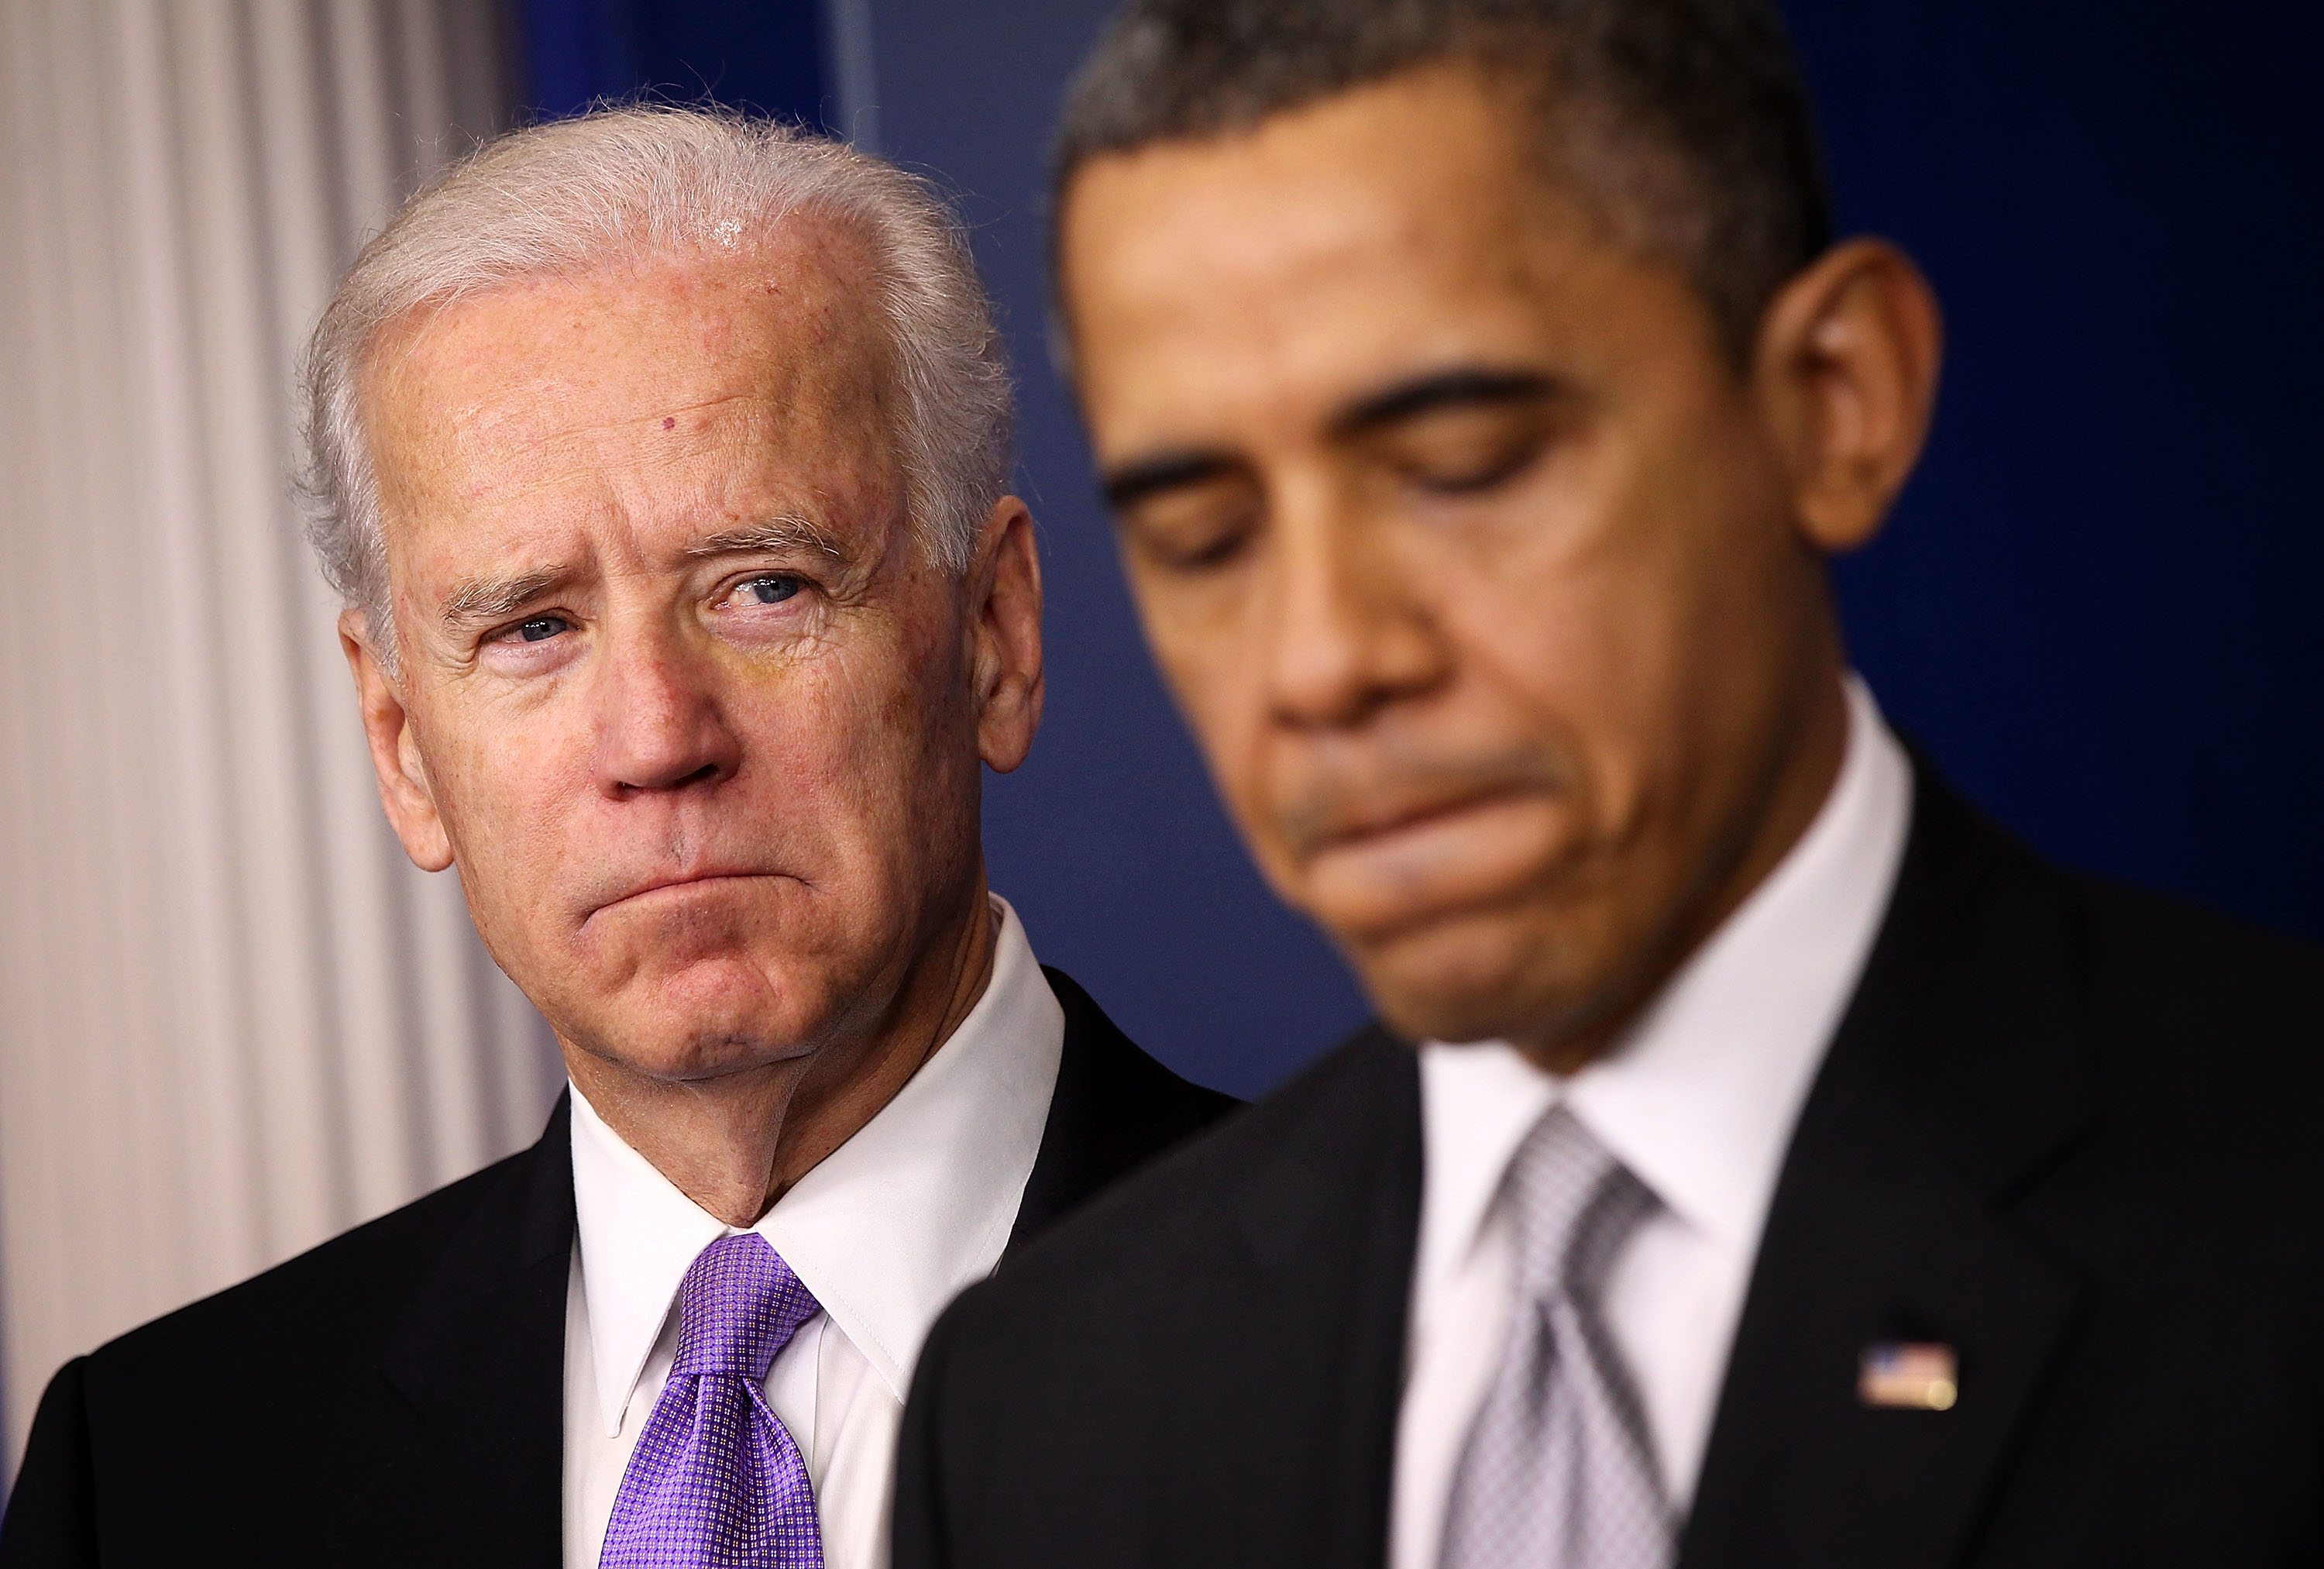 Joe Biden and Barack Obama standing, both in business suits with serious expressions